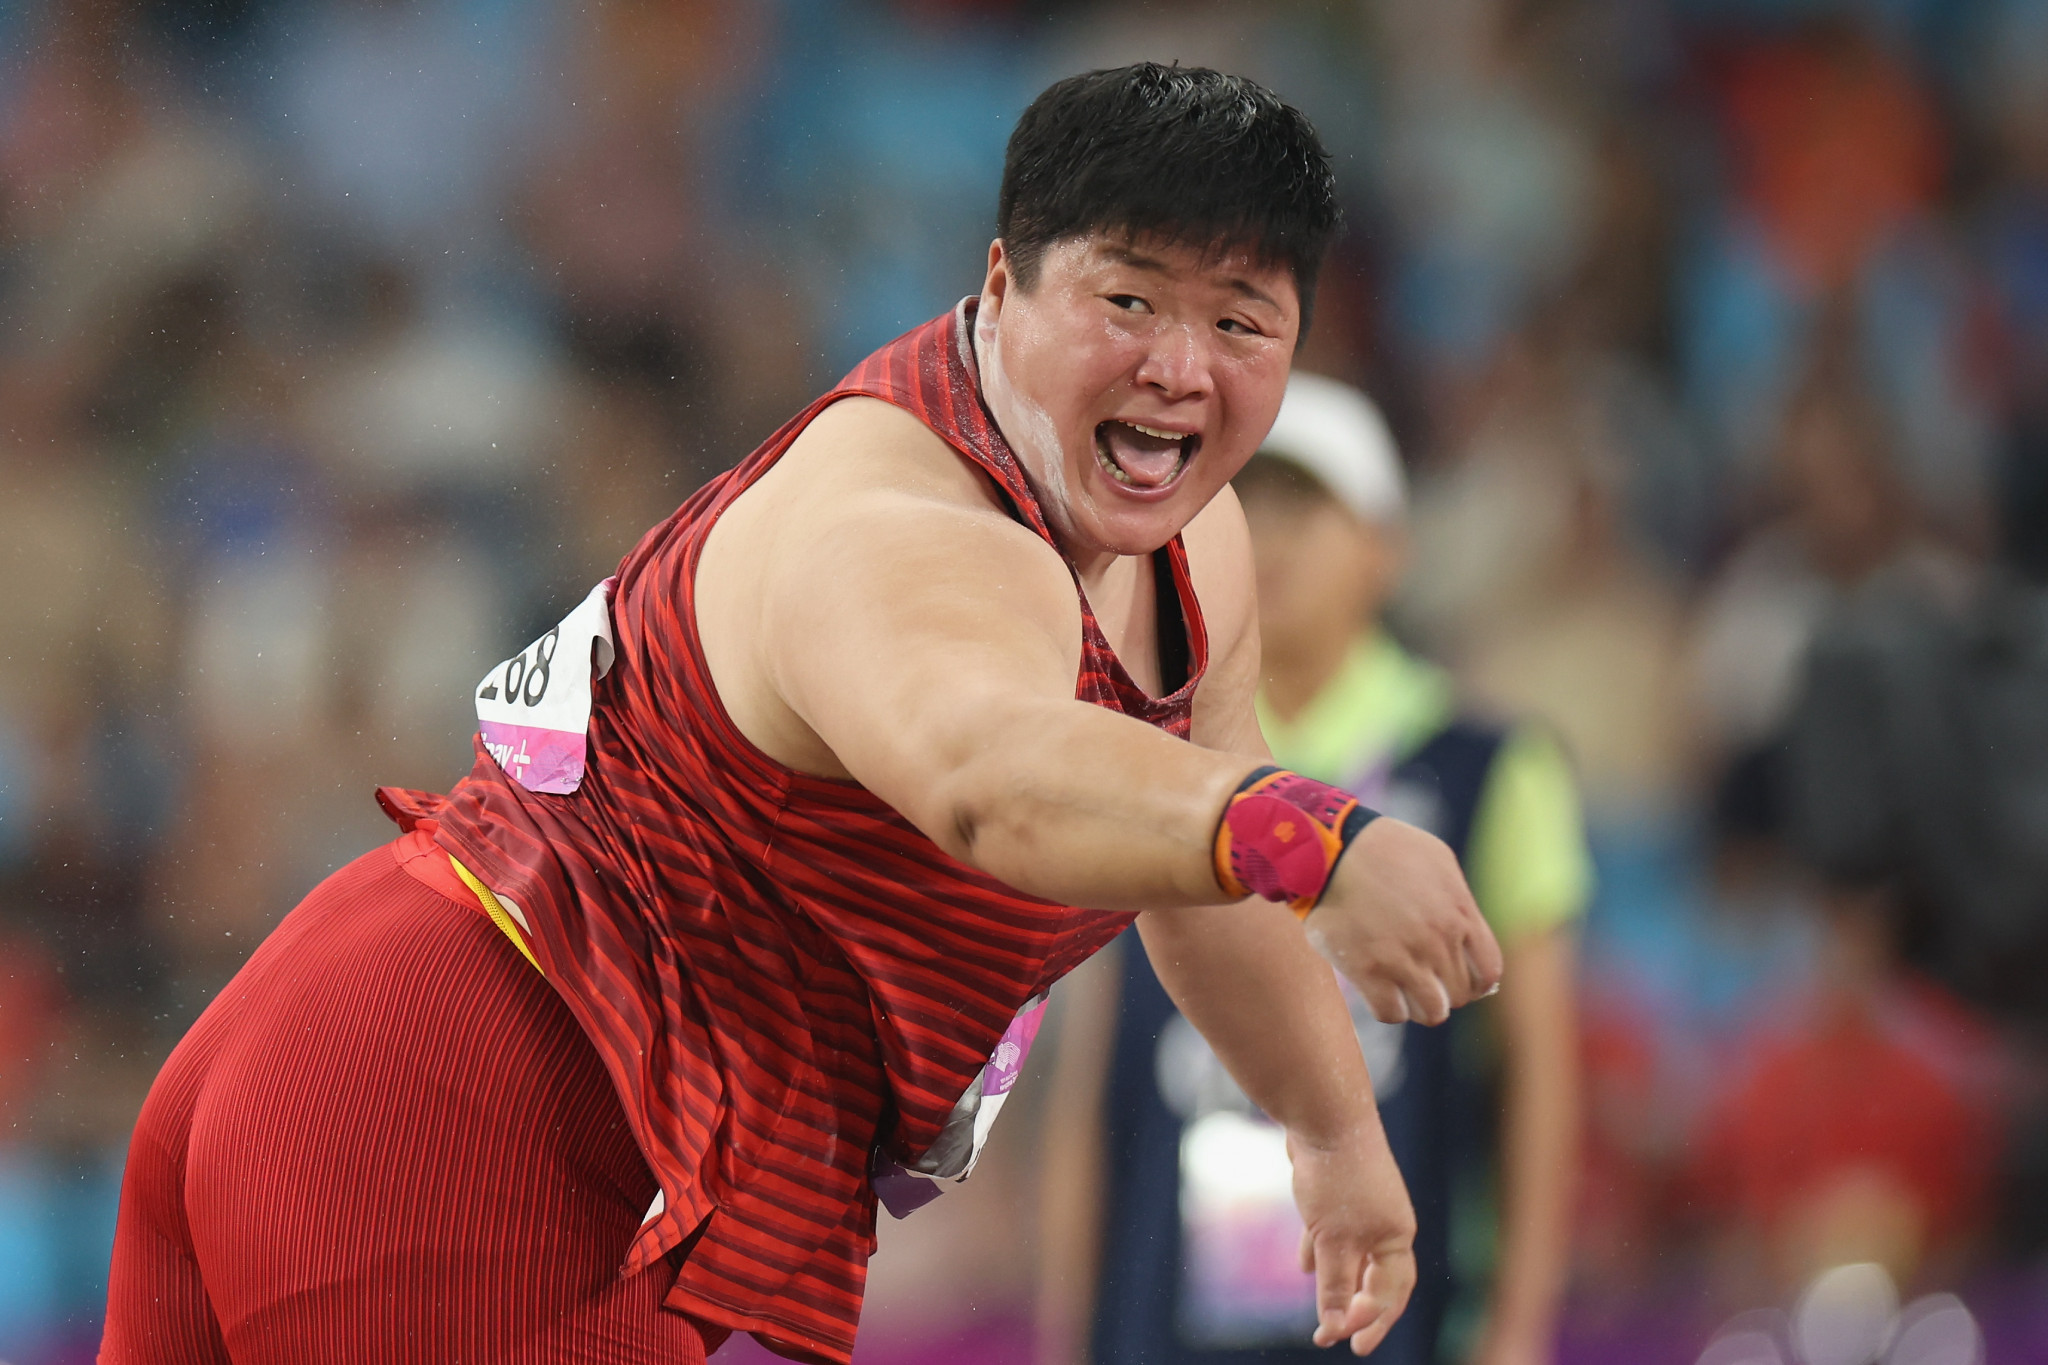 China's Gong Lijiao won her third consecutive Asian Games shot put gold with a 20.55m throw ©Getty Images